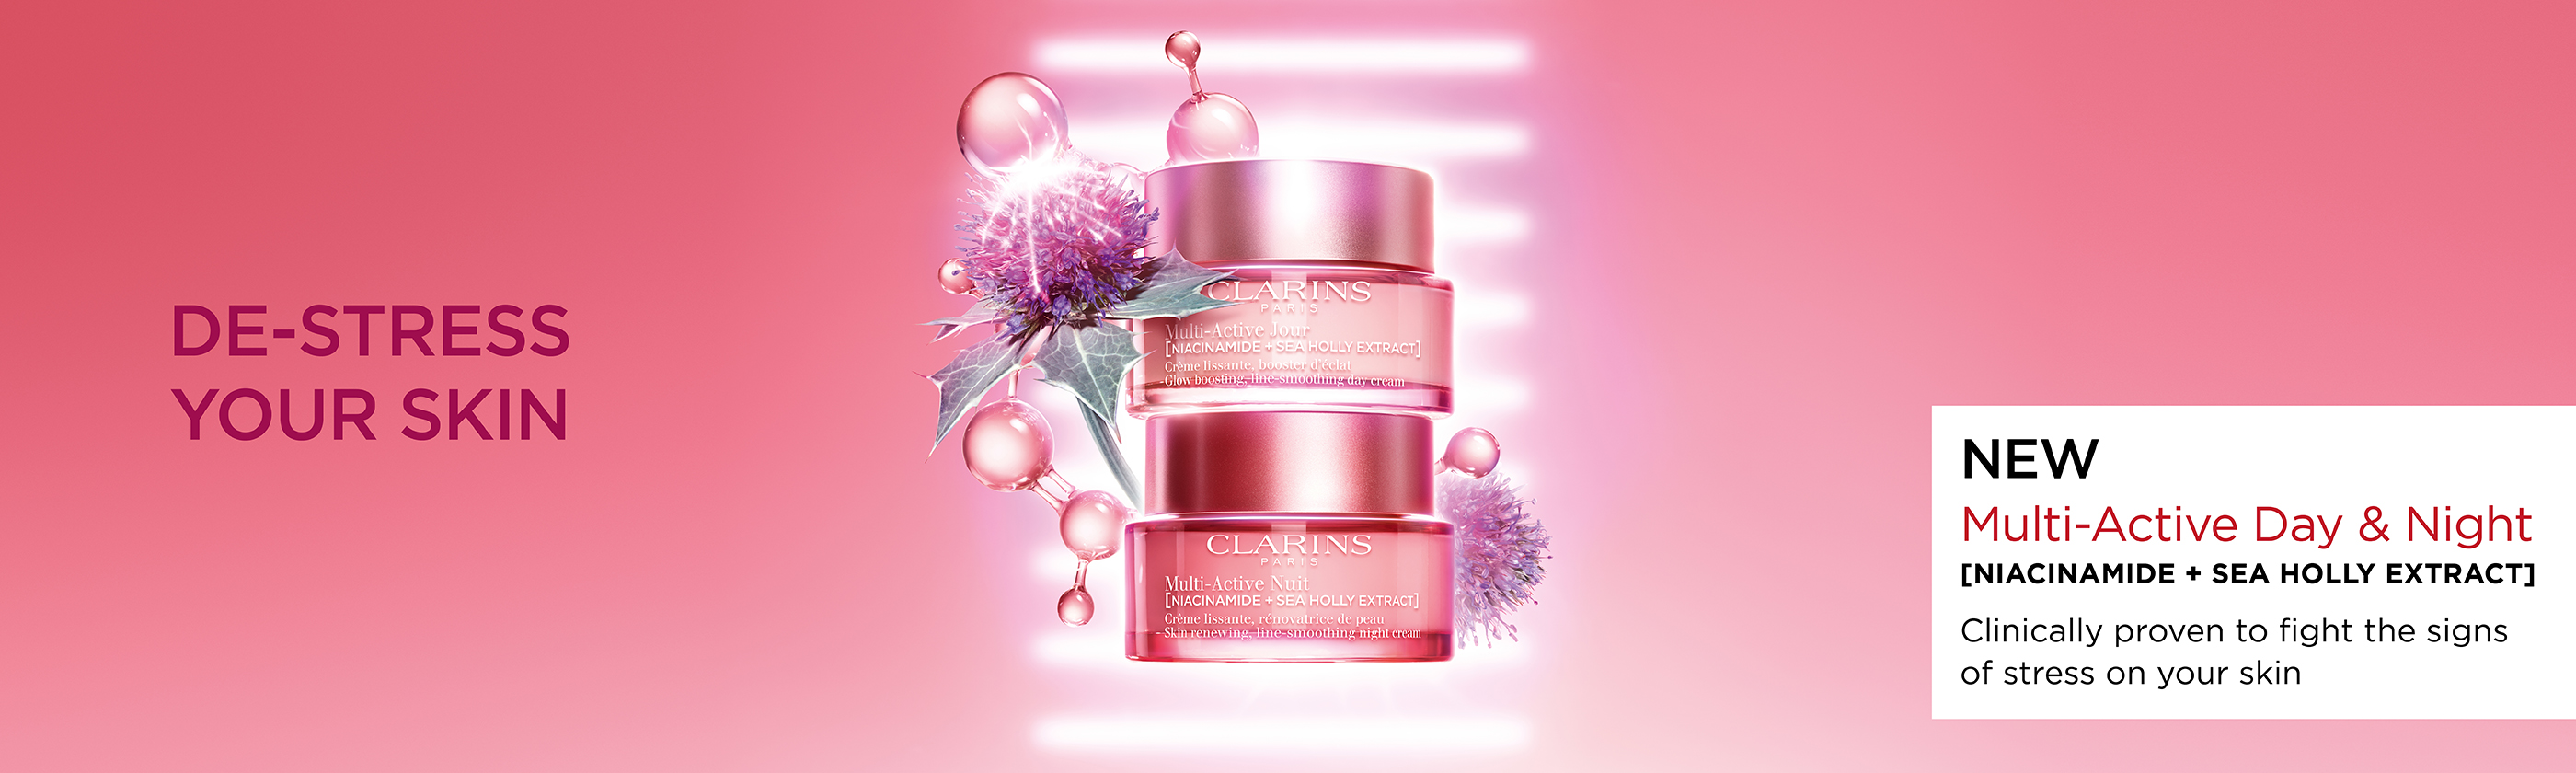 beauty-clarins-banner-010224